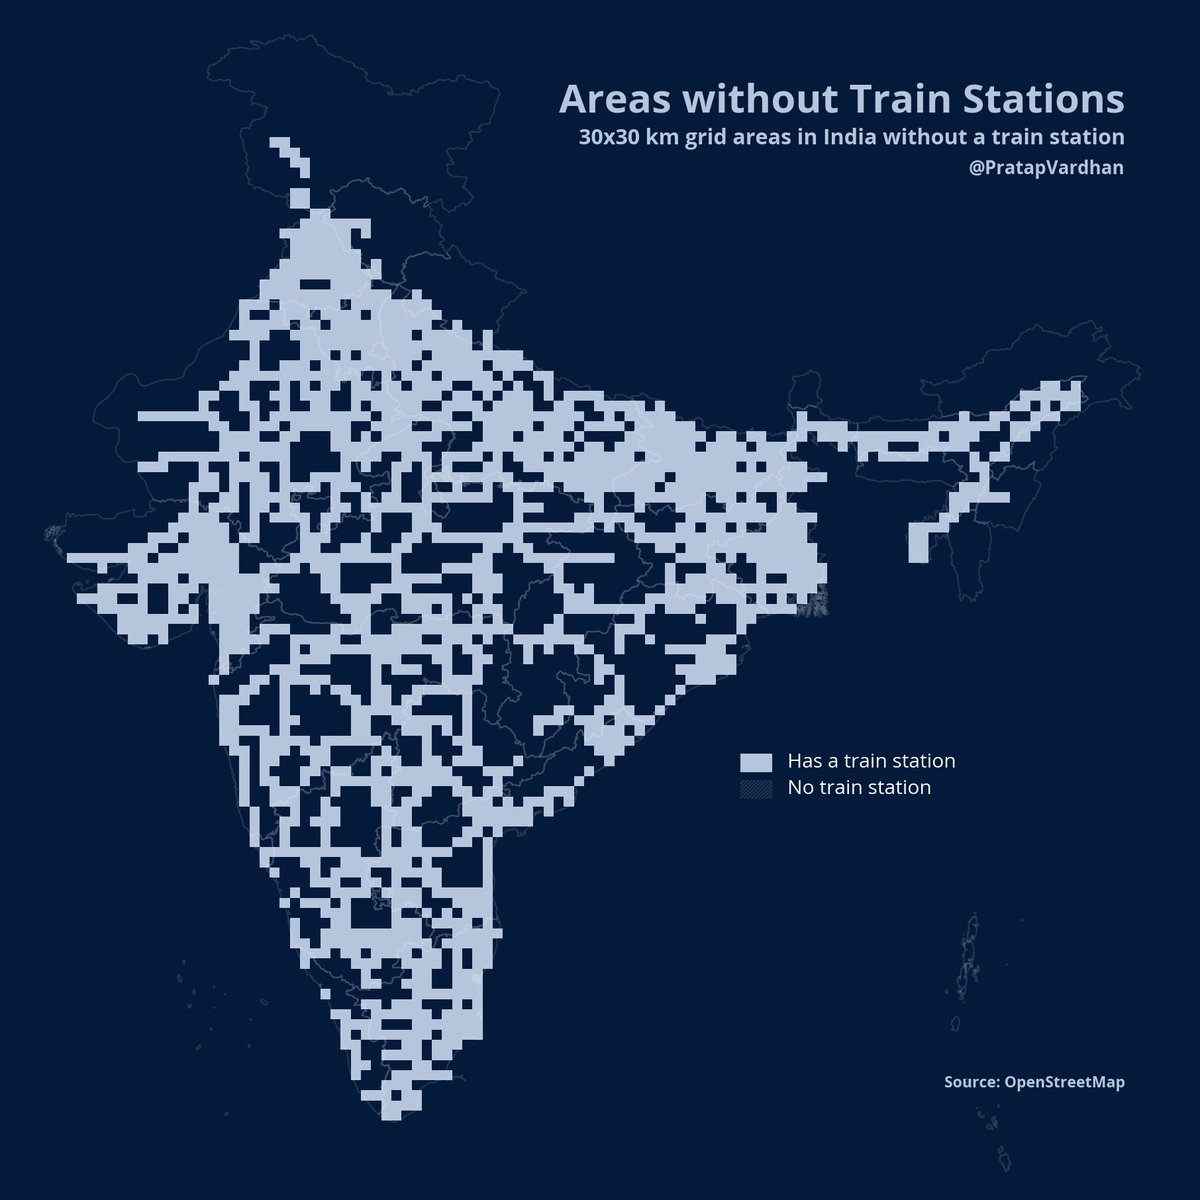 Areas without Train Stations: These are 30x30 km grid areas in India without a train station. #30DayMapChallenge Day 19: NULLData:  #openstreetmap Made:  @Matplotlib  #python  #gis